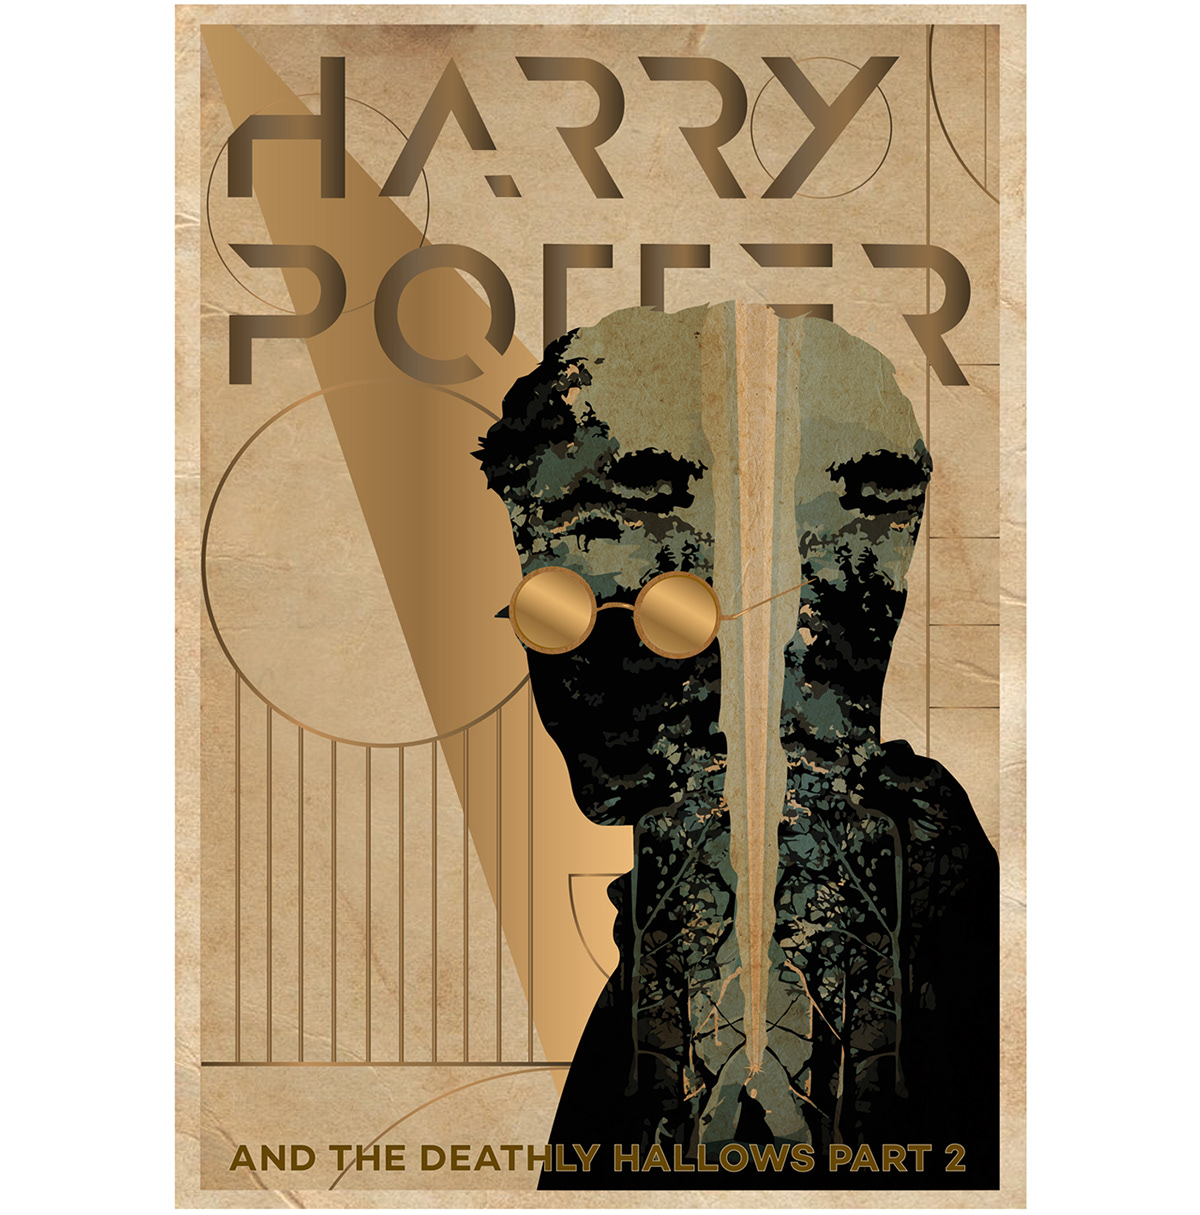 harry potter movie poster art deco Style